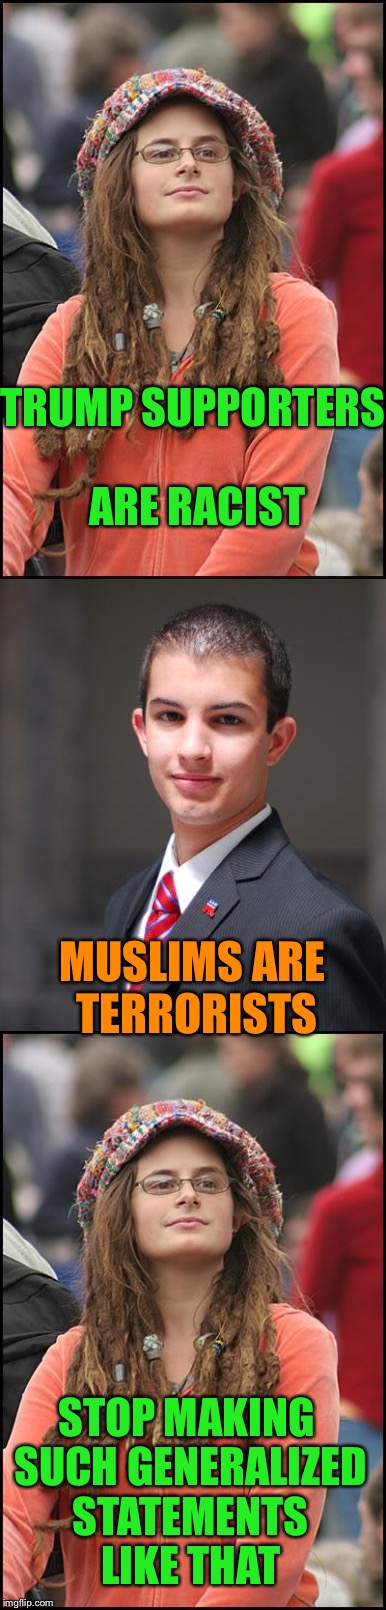 Double standards????? | TRUMP SUPPORTERS ARE RACIST; MUSLIMS ARE TERRORISTS; STOP MAKING SUCH GENERALIZED STATEMENTS LIKE THAT | image tagged in liberals | made w/ Imgflip meme maker